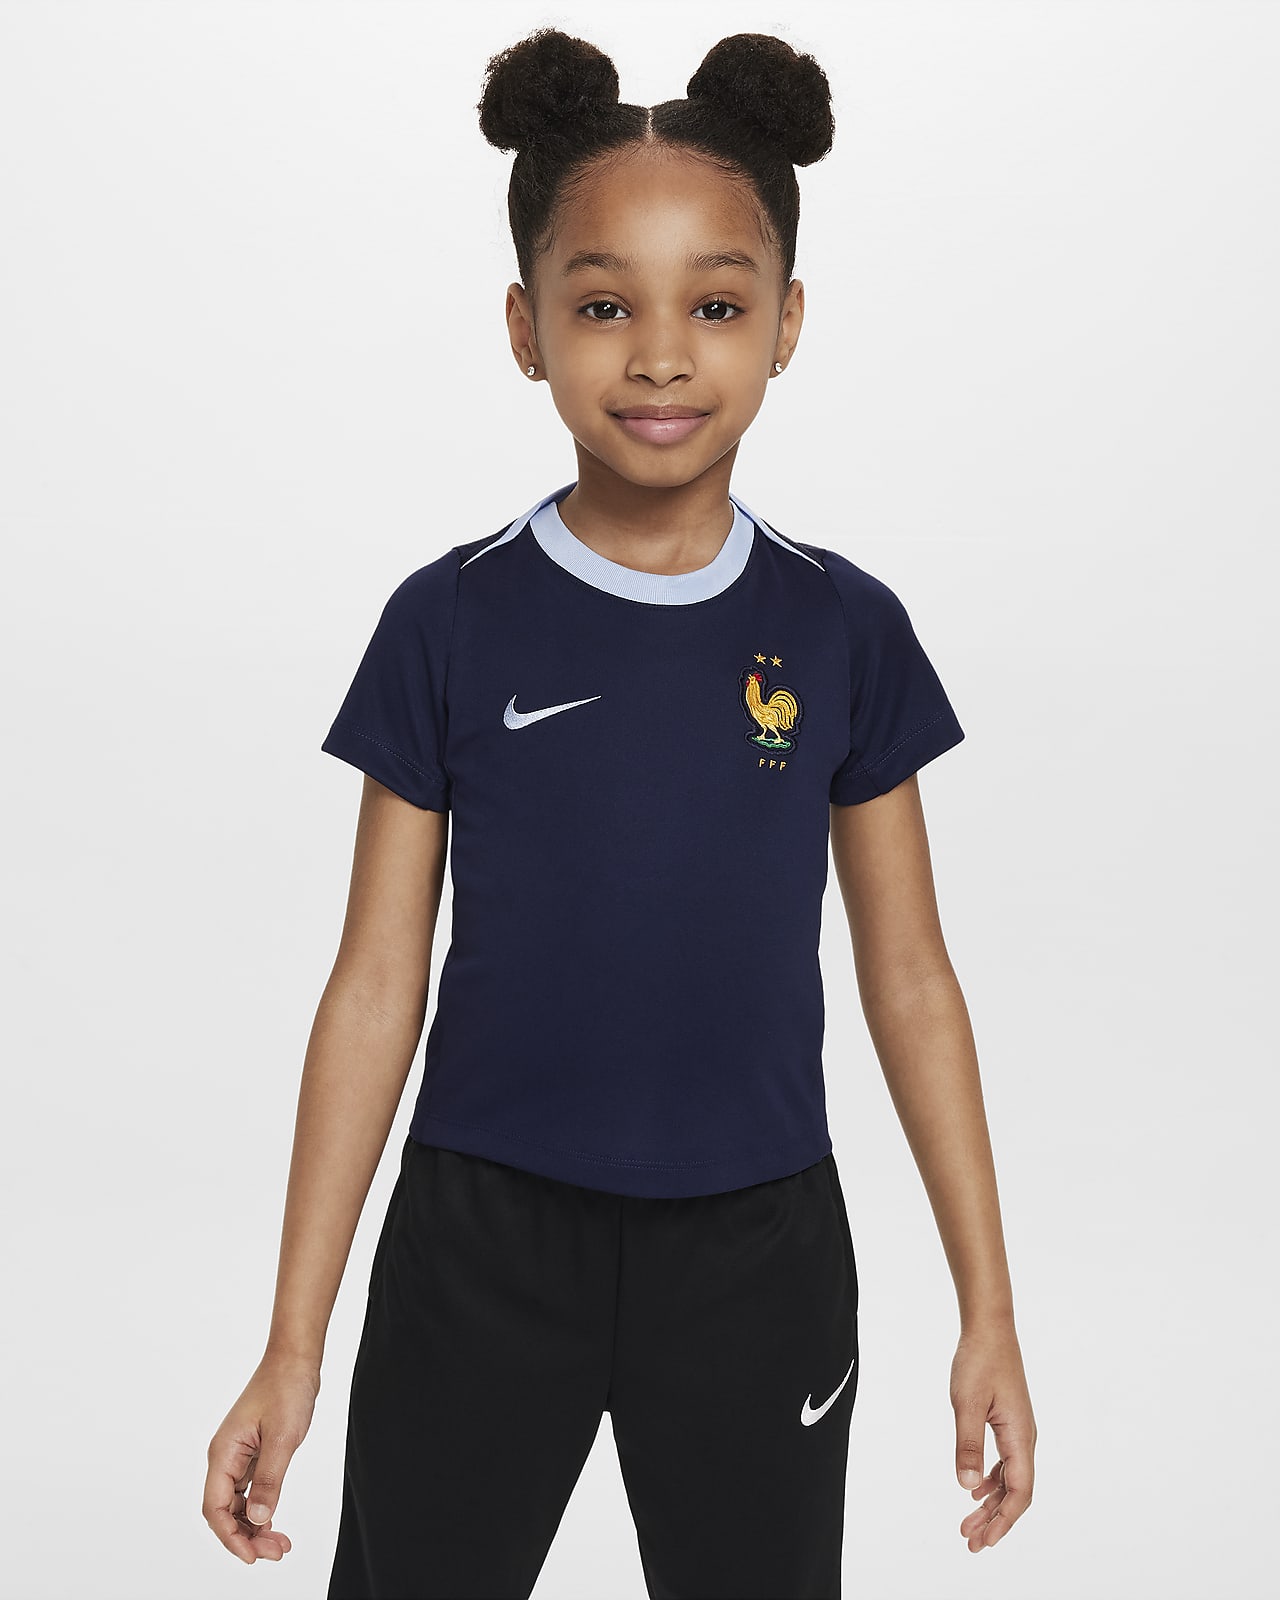 FFF Academy Pro Younger Kids' Nike Dri-FIT Football Short-Sleeve Top